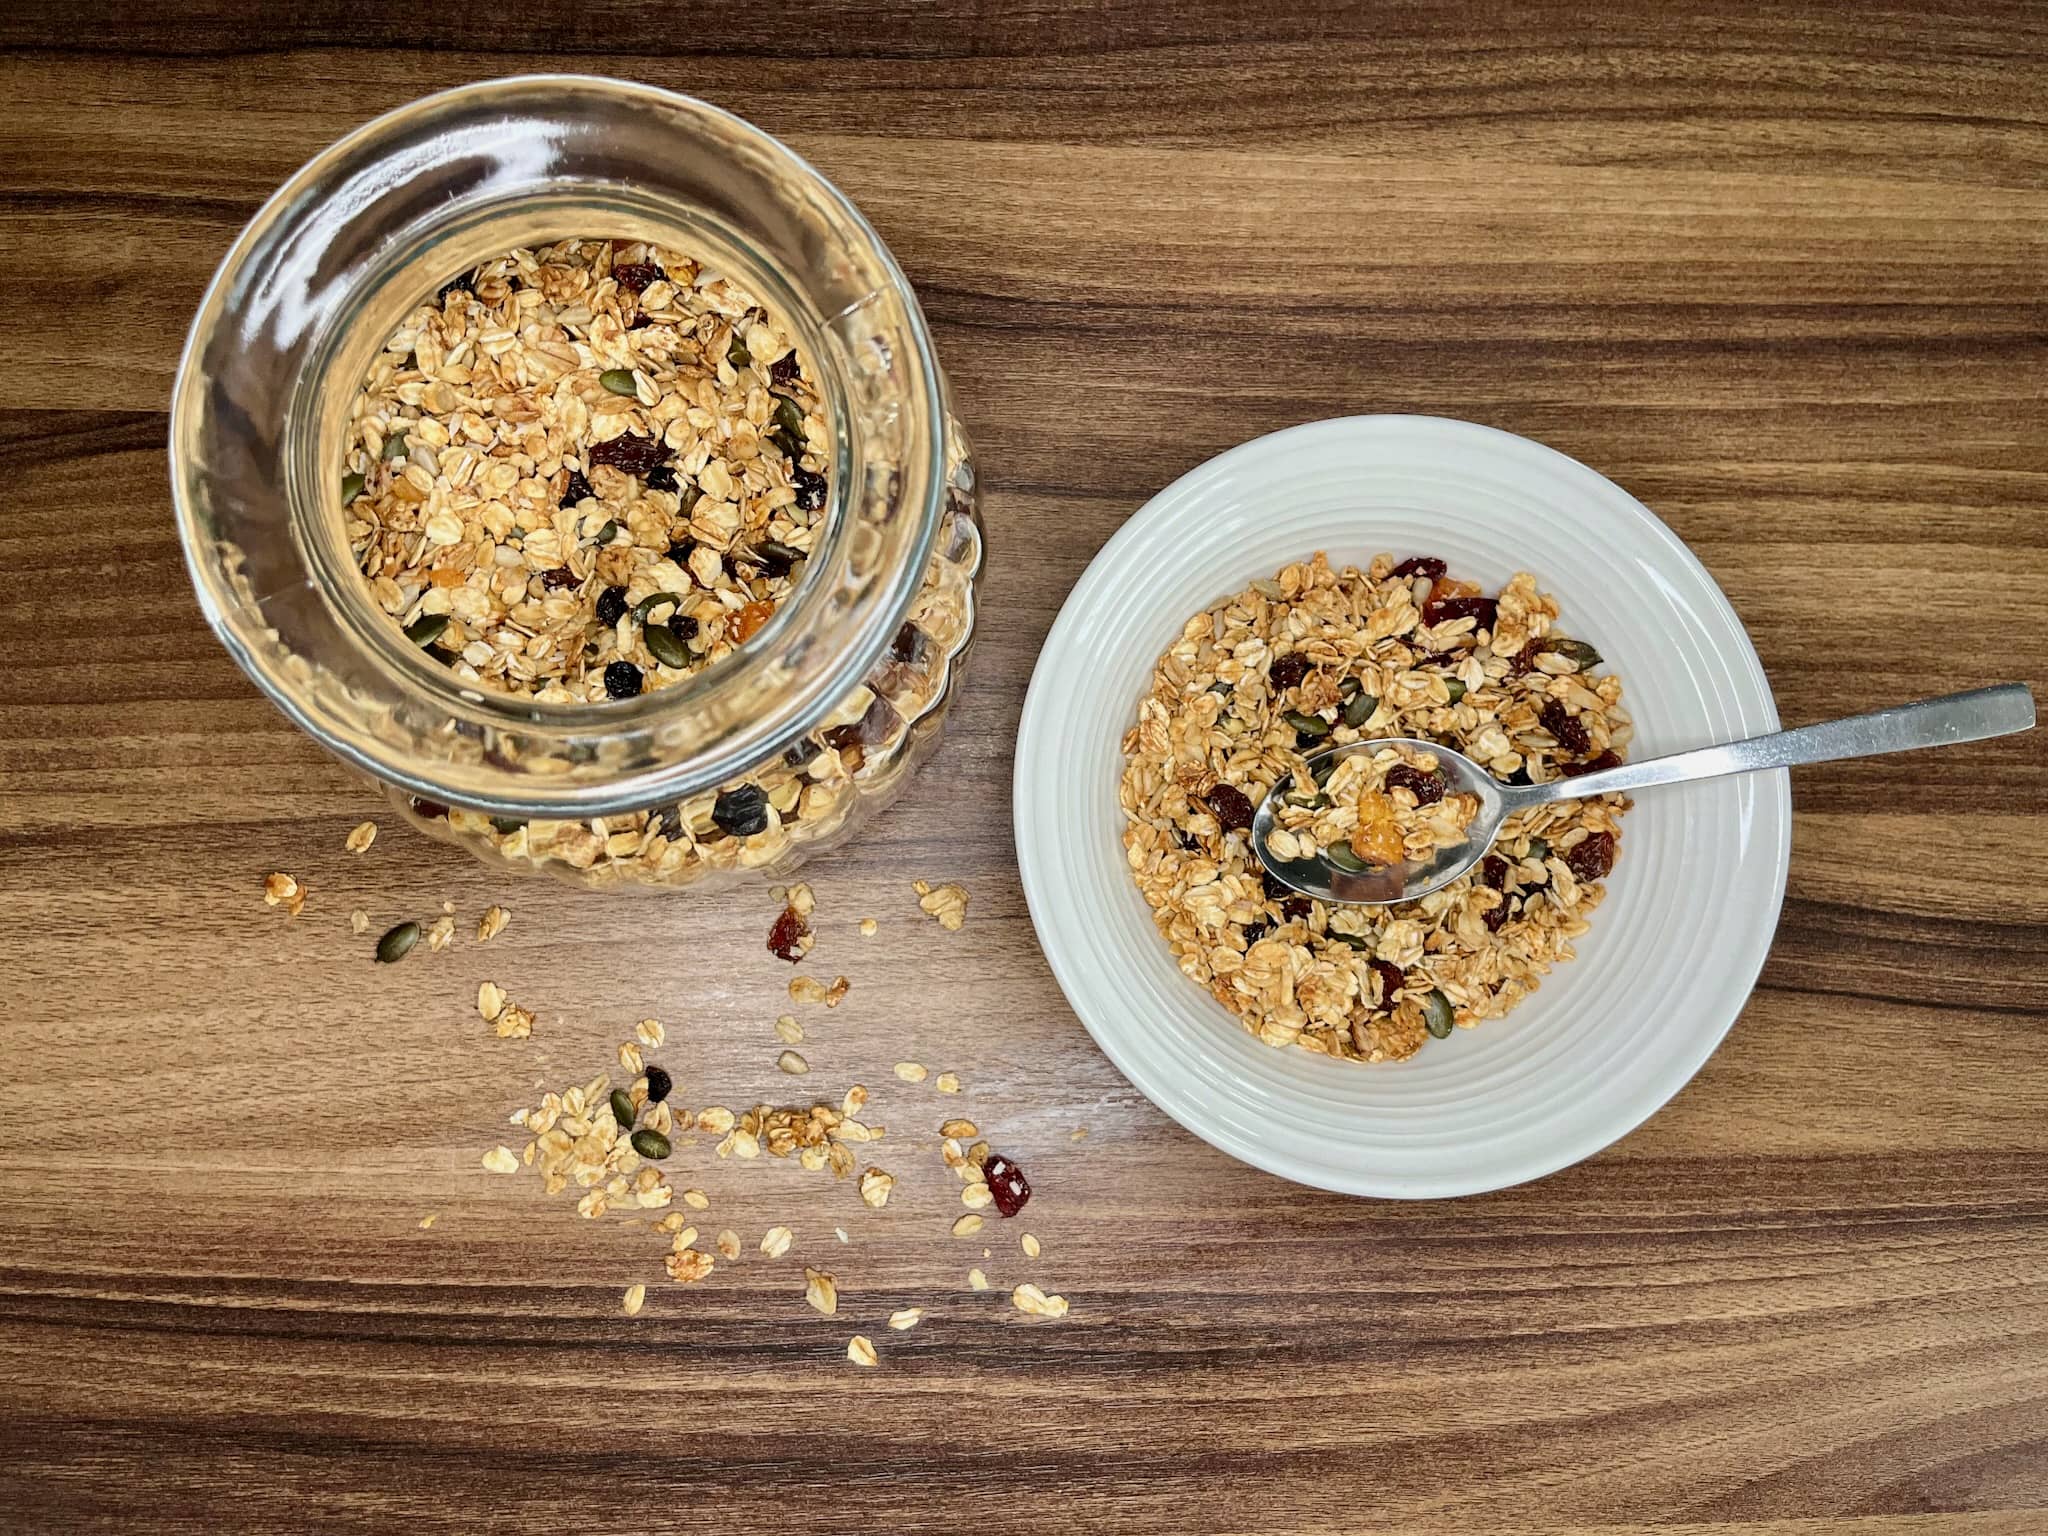 Nut-free homemade granola in a glass jar along with a portion on a plate